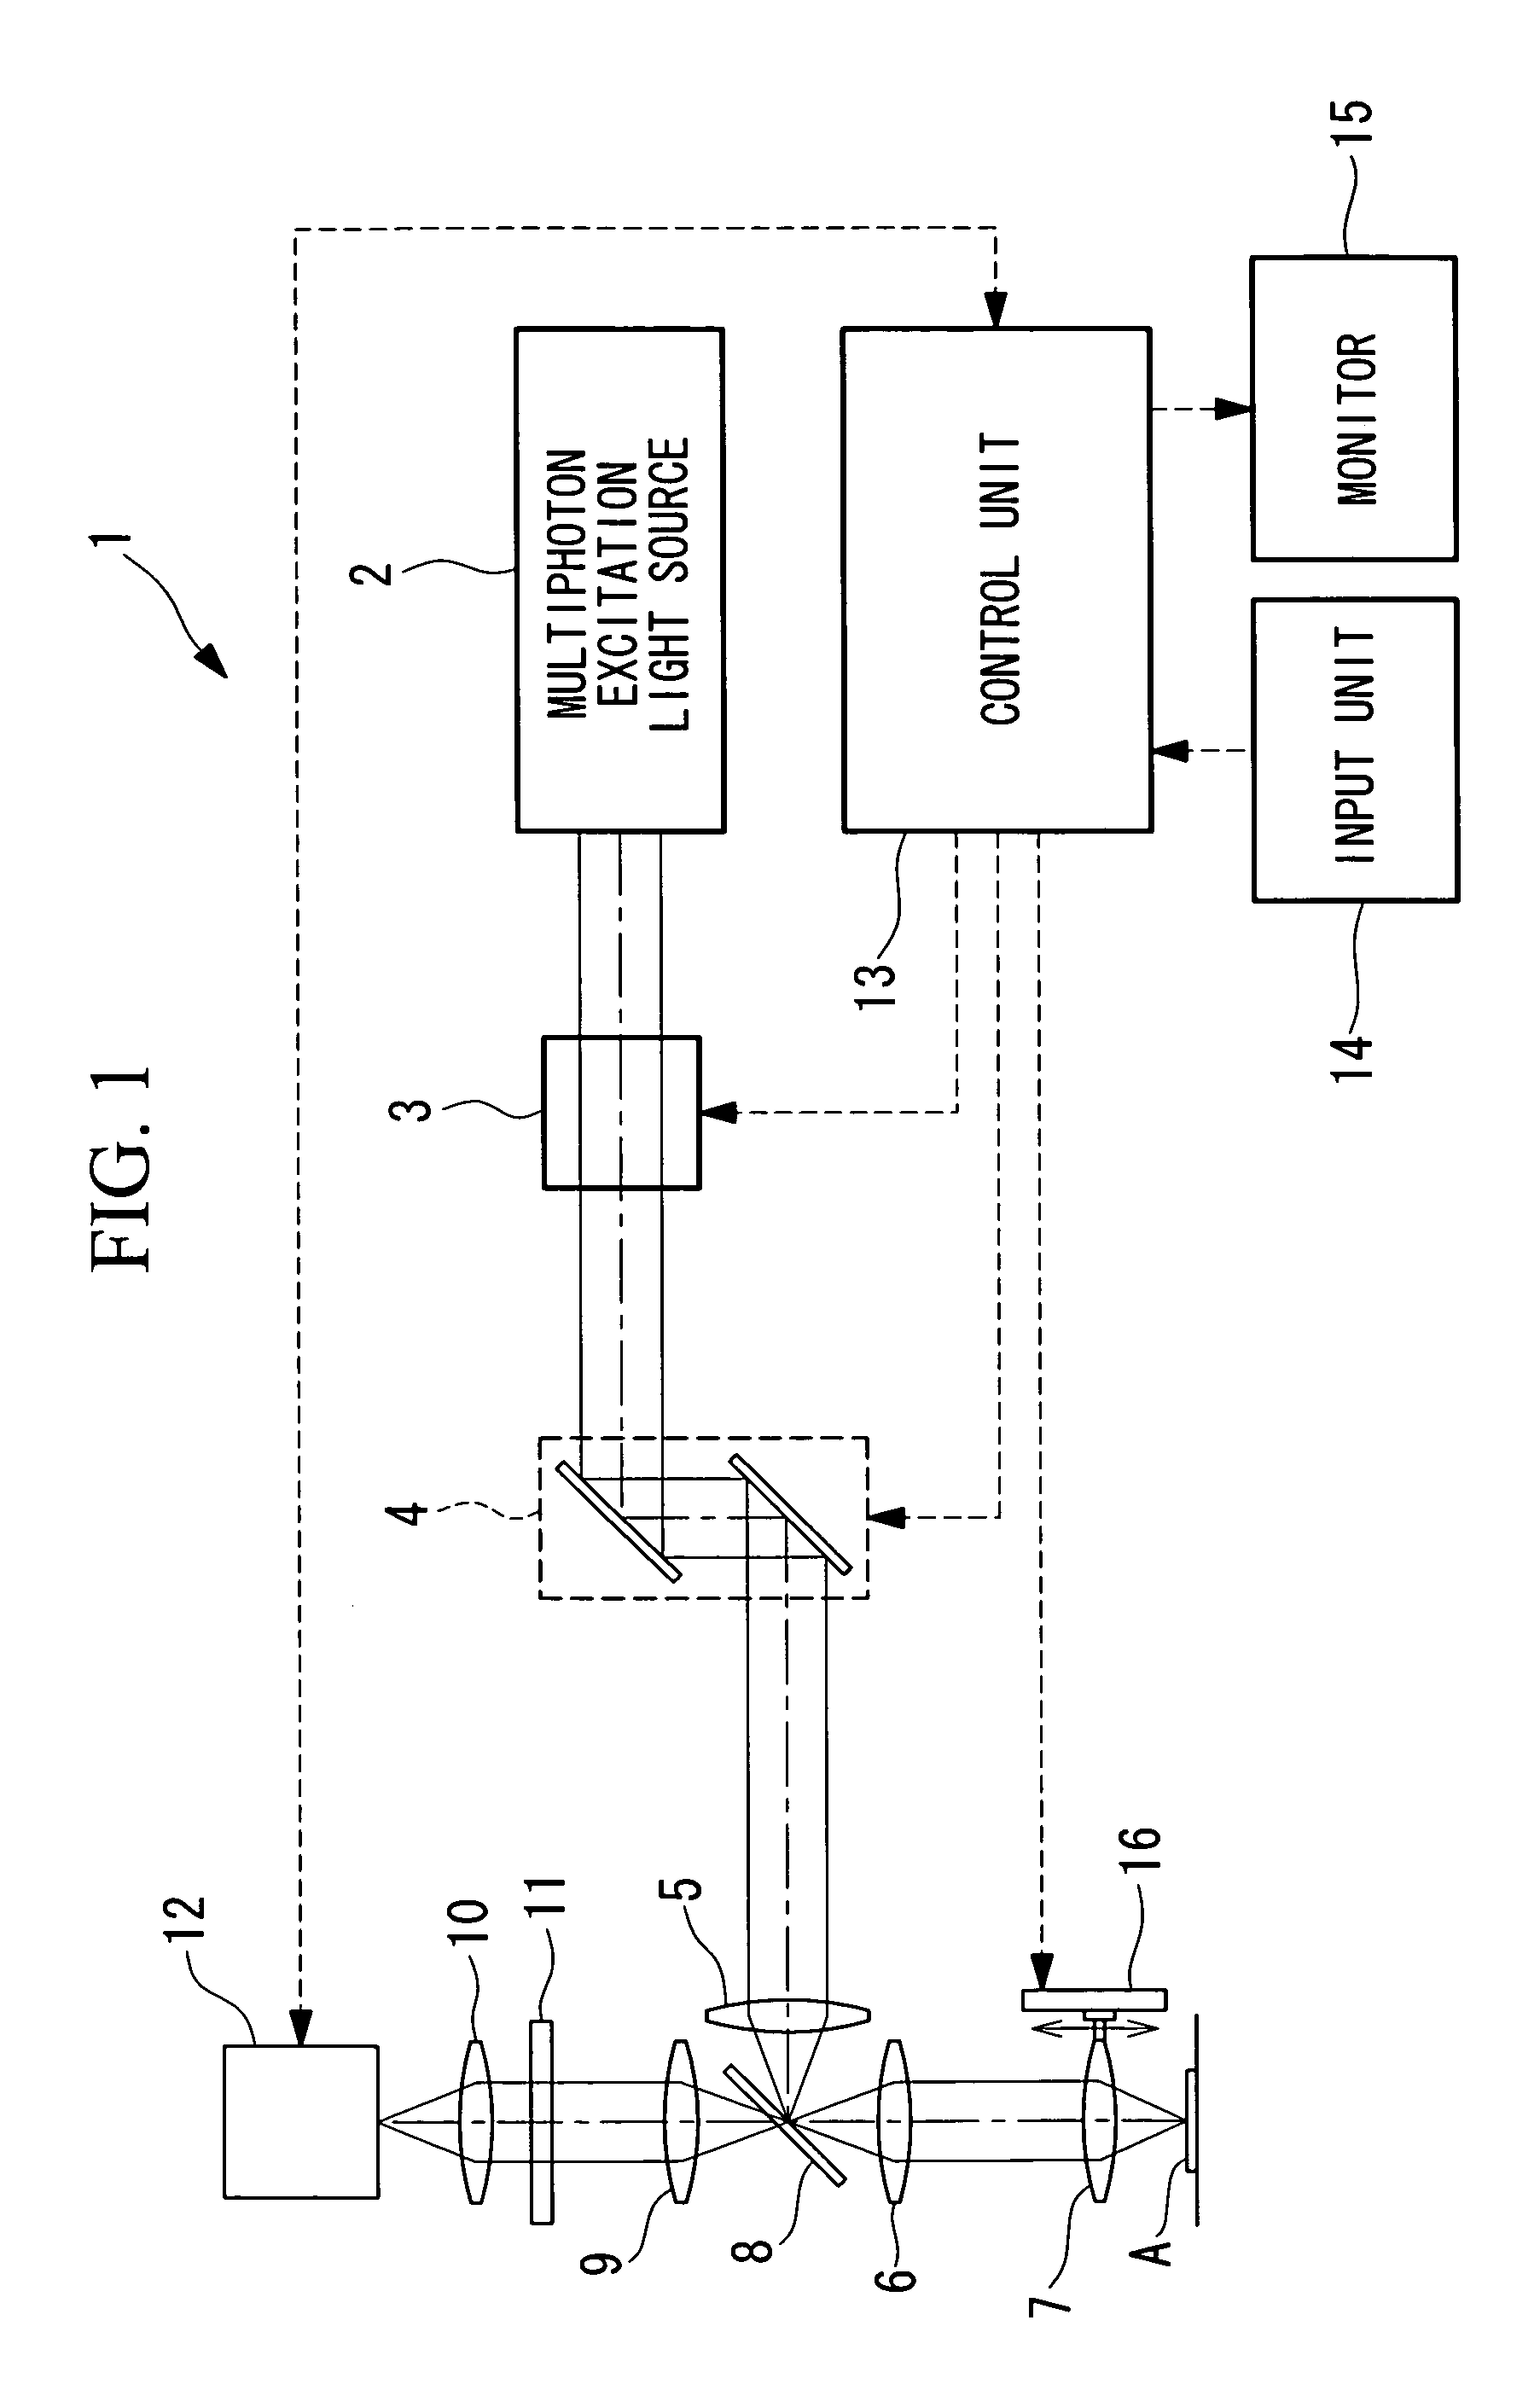 Scanning optical device which sets hardware in association with a depth of a focus position based on hardware set values stored in association with depths of focus positions